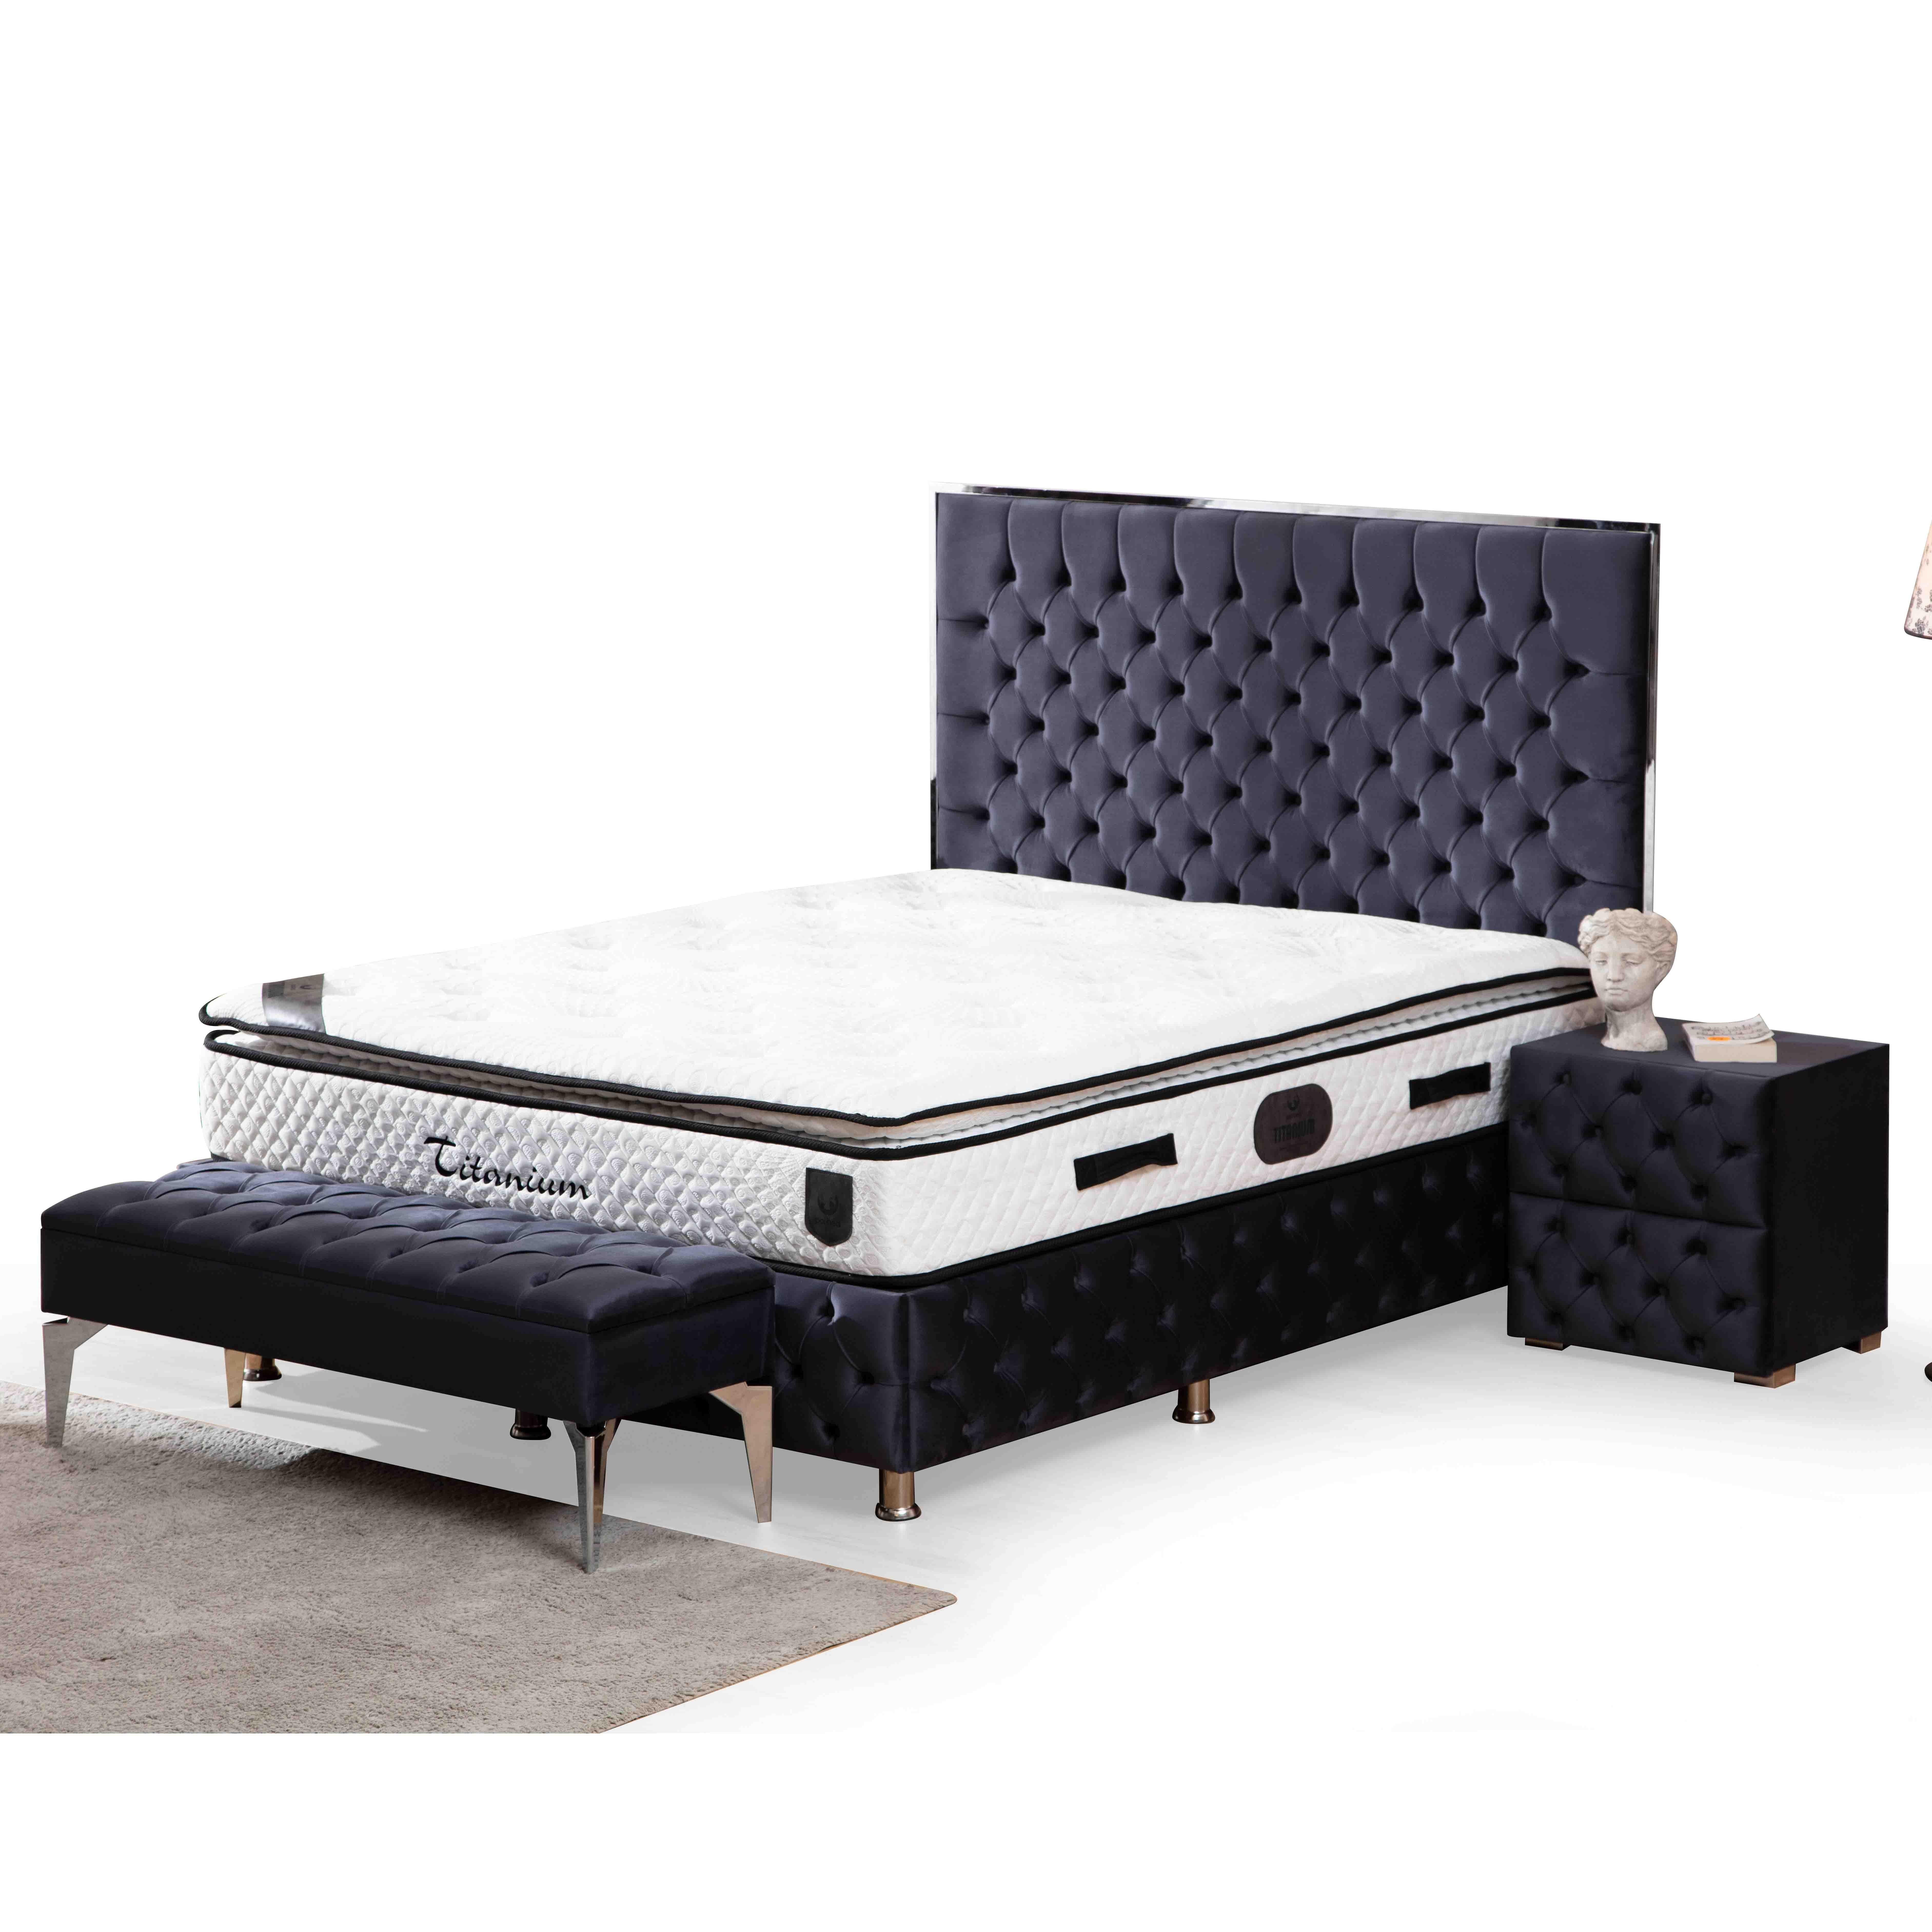 Metalax Bed With Storage 120*200